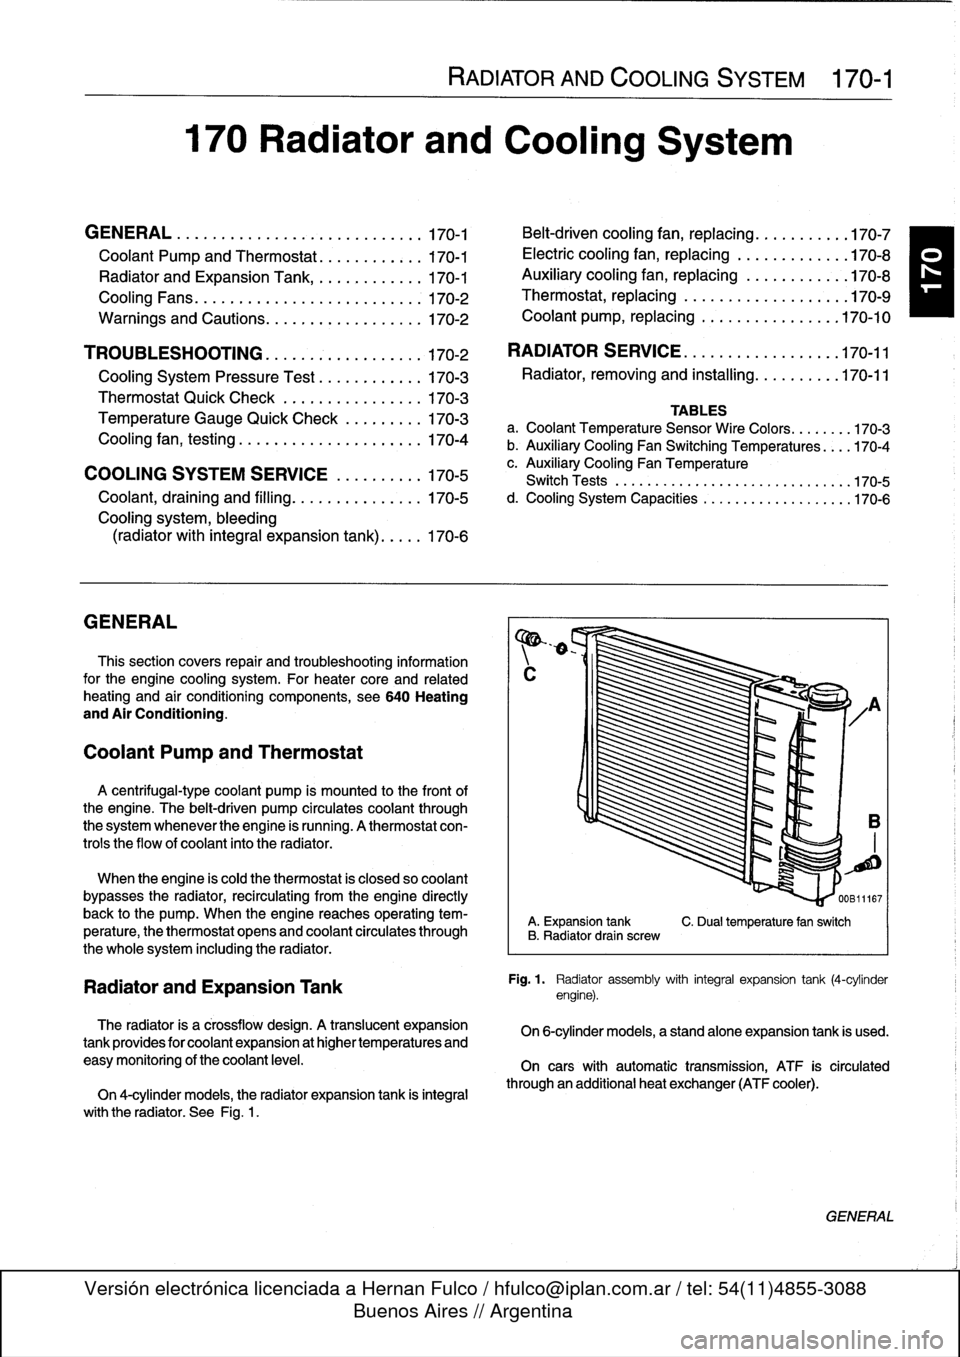 BMW 323i 1995 E36 Workshop Manual 170
Radiator
and
Cooling
System

GENERAL
.
.
.....
.
...
.
.
.
.
.
....
.
.
.
.
.
.
.
.170-1

Coolant
Pump
and
Thermostat
........
.
.
.
.
170-1

Radiator
and
Expansion
Tank
.........
.
...
170-1

Coo